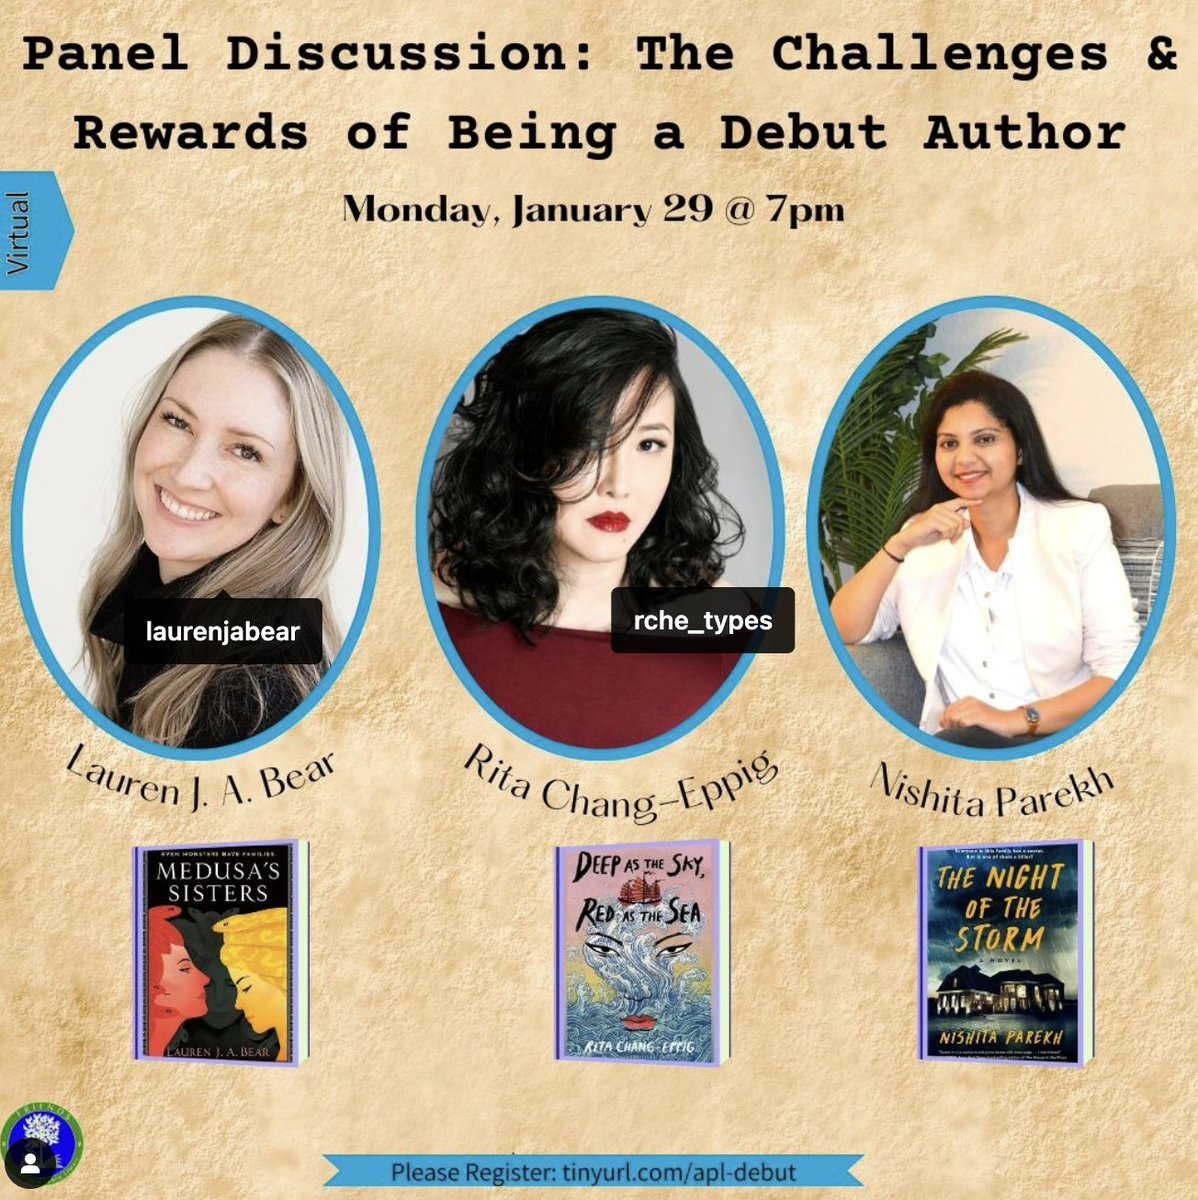 #Massachusetts #libraries host 3 #debutauthors: @laurenjabear, @rche_types, @NishitaAuthor for a VIRTUAL conversation with Q & A! Info: ow.ly/7trq50Qu0ZA #authors #publishing #bookstagram #CenterForTheBook @MassLibAssoc @mblclibraries @NEIBAbooks